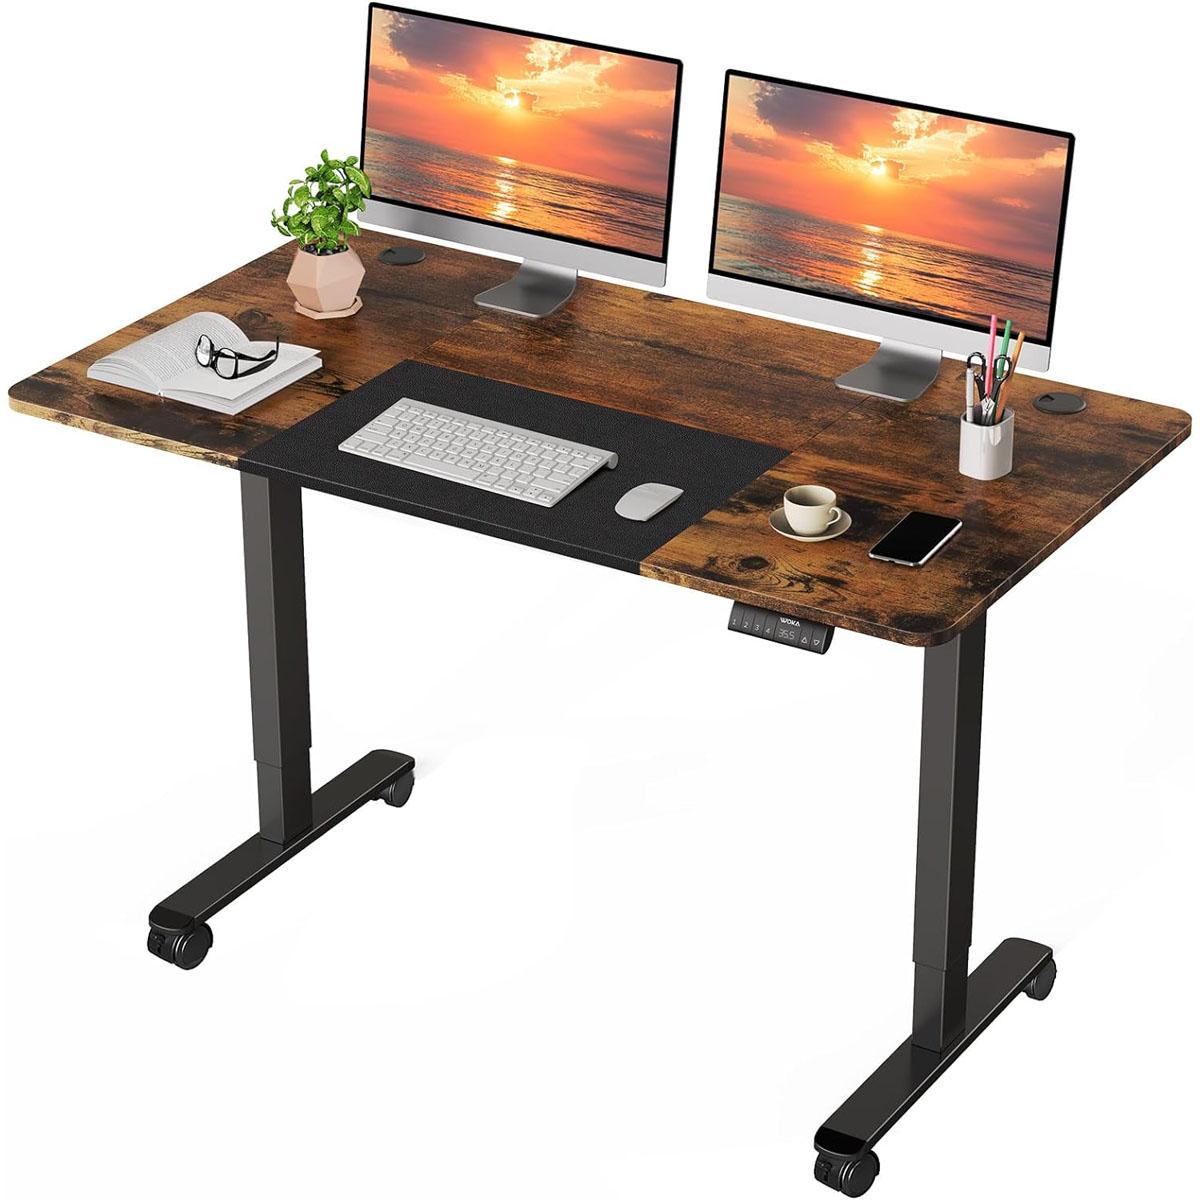 Woka 55in Electric Adjustable Rustic and Black Standing Desk for $129.99 Shipped